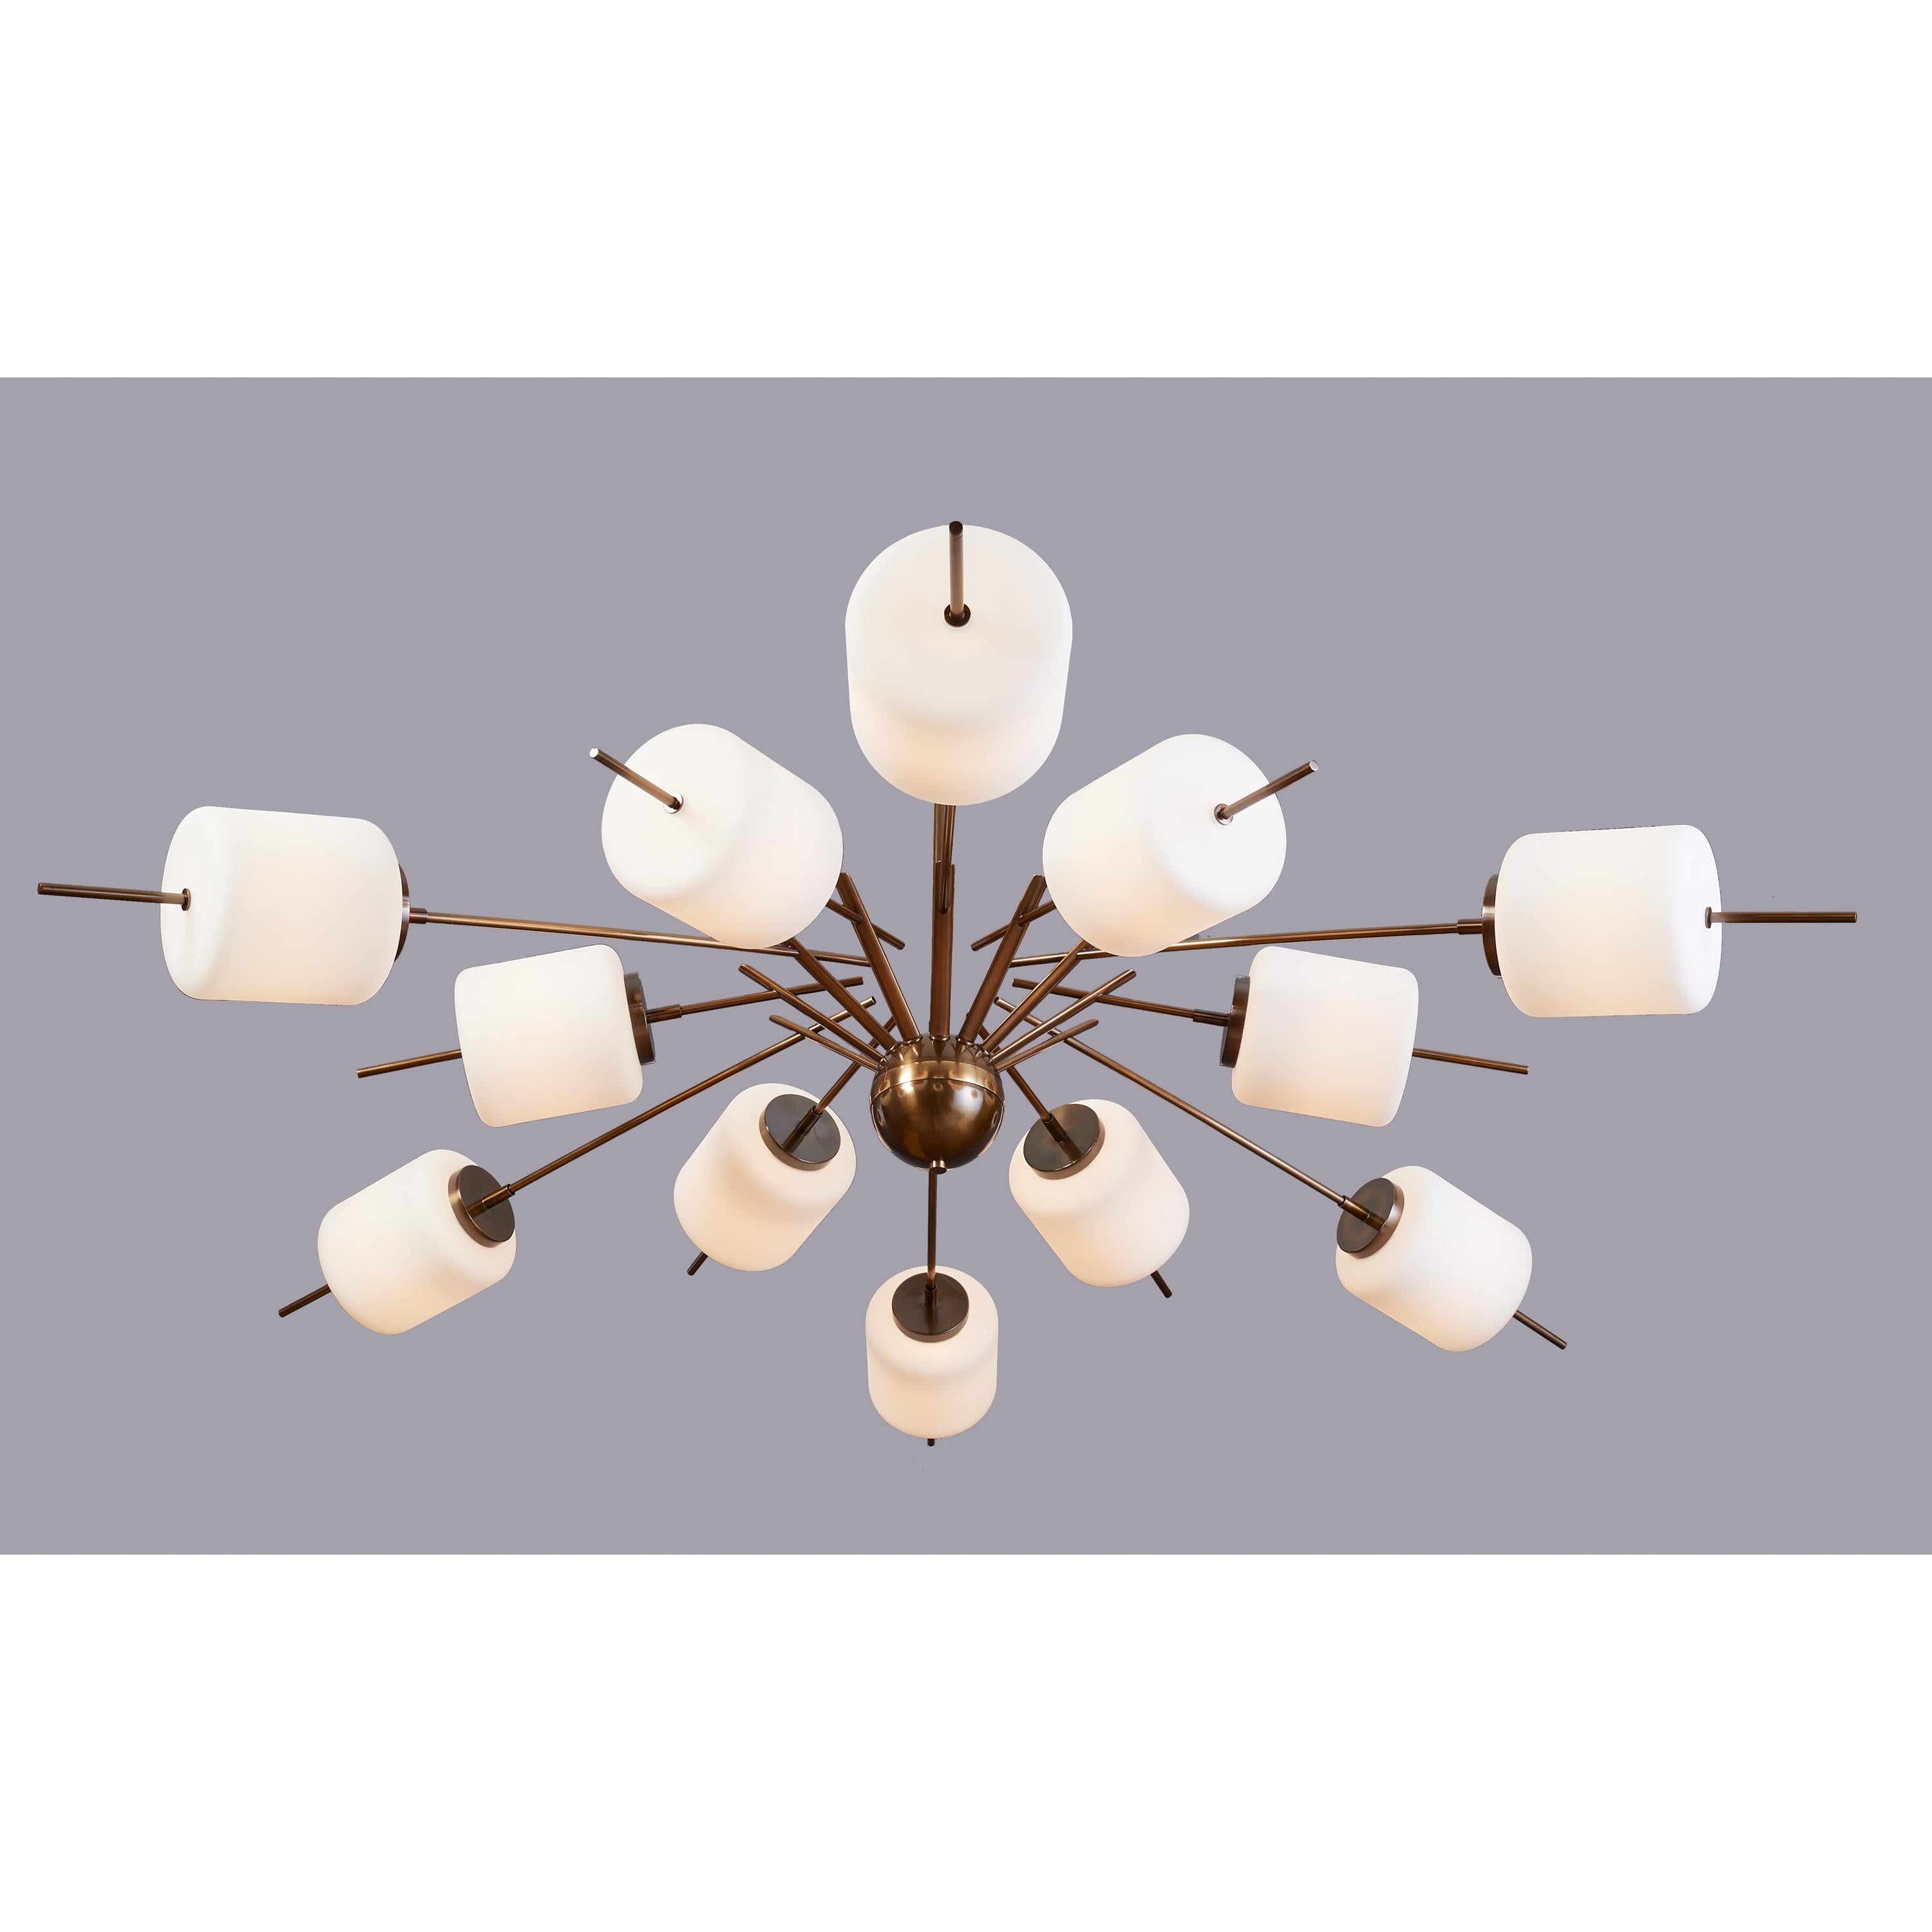 Monumental Chandelier with Twelve Arms and White Glass Shades, Italy 1960s In Good Condition For Sale In New York, NY